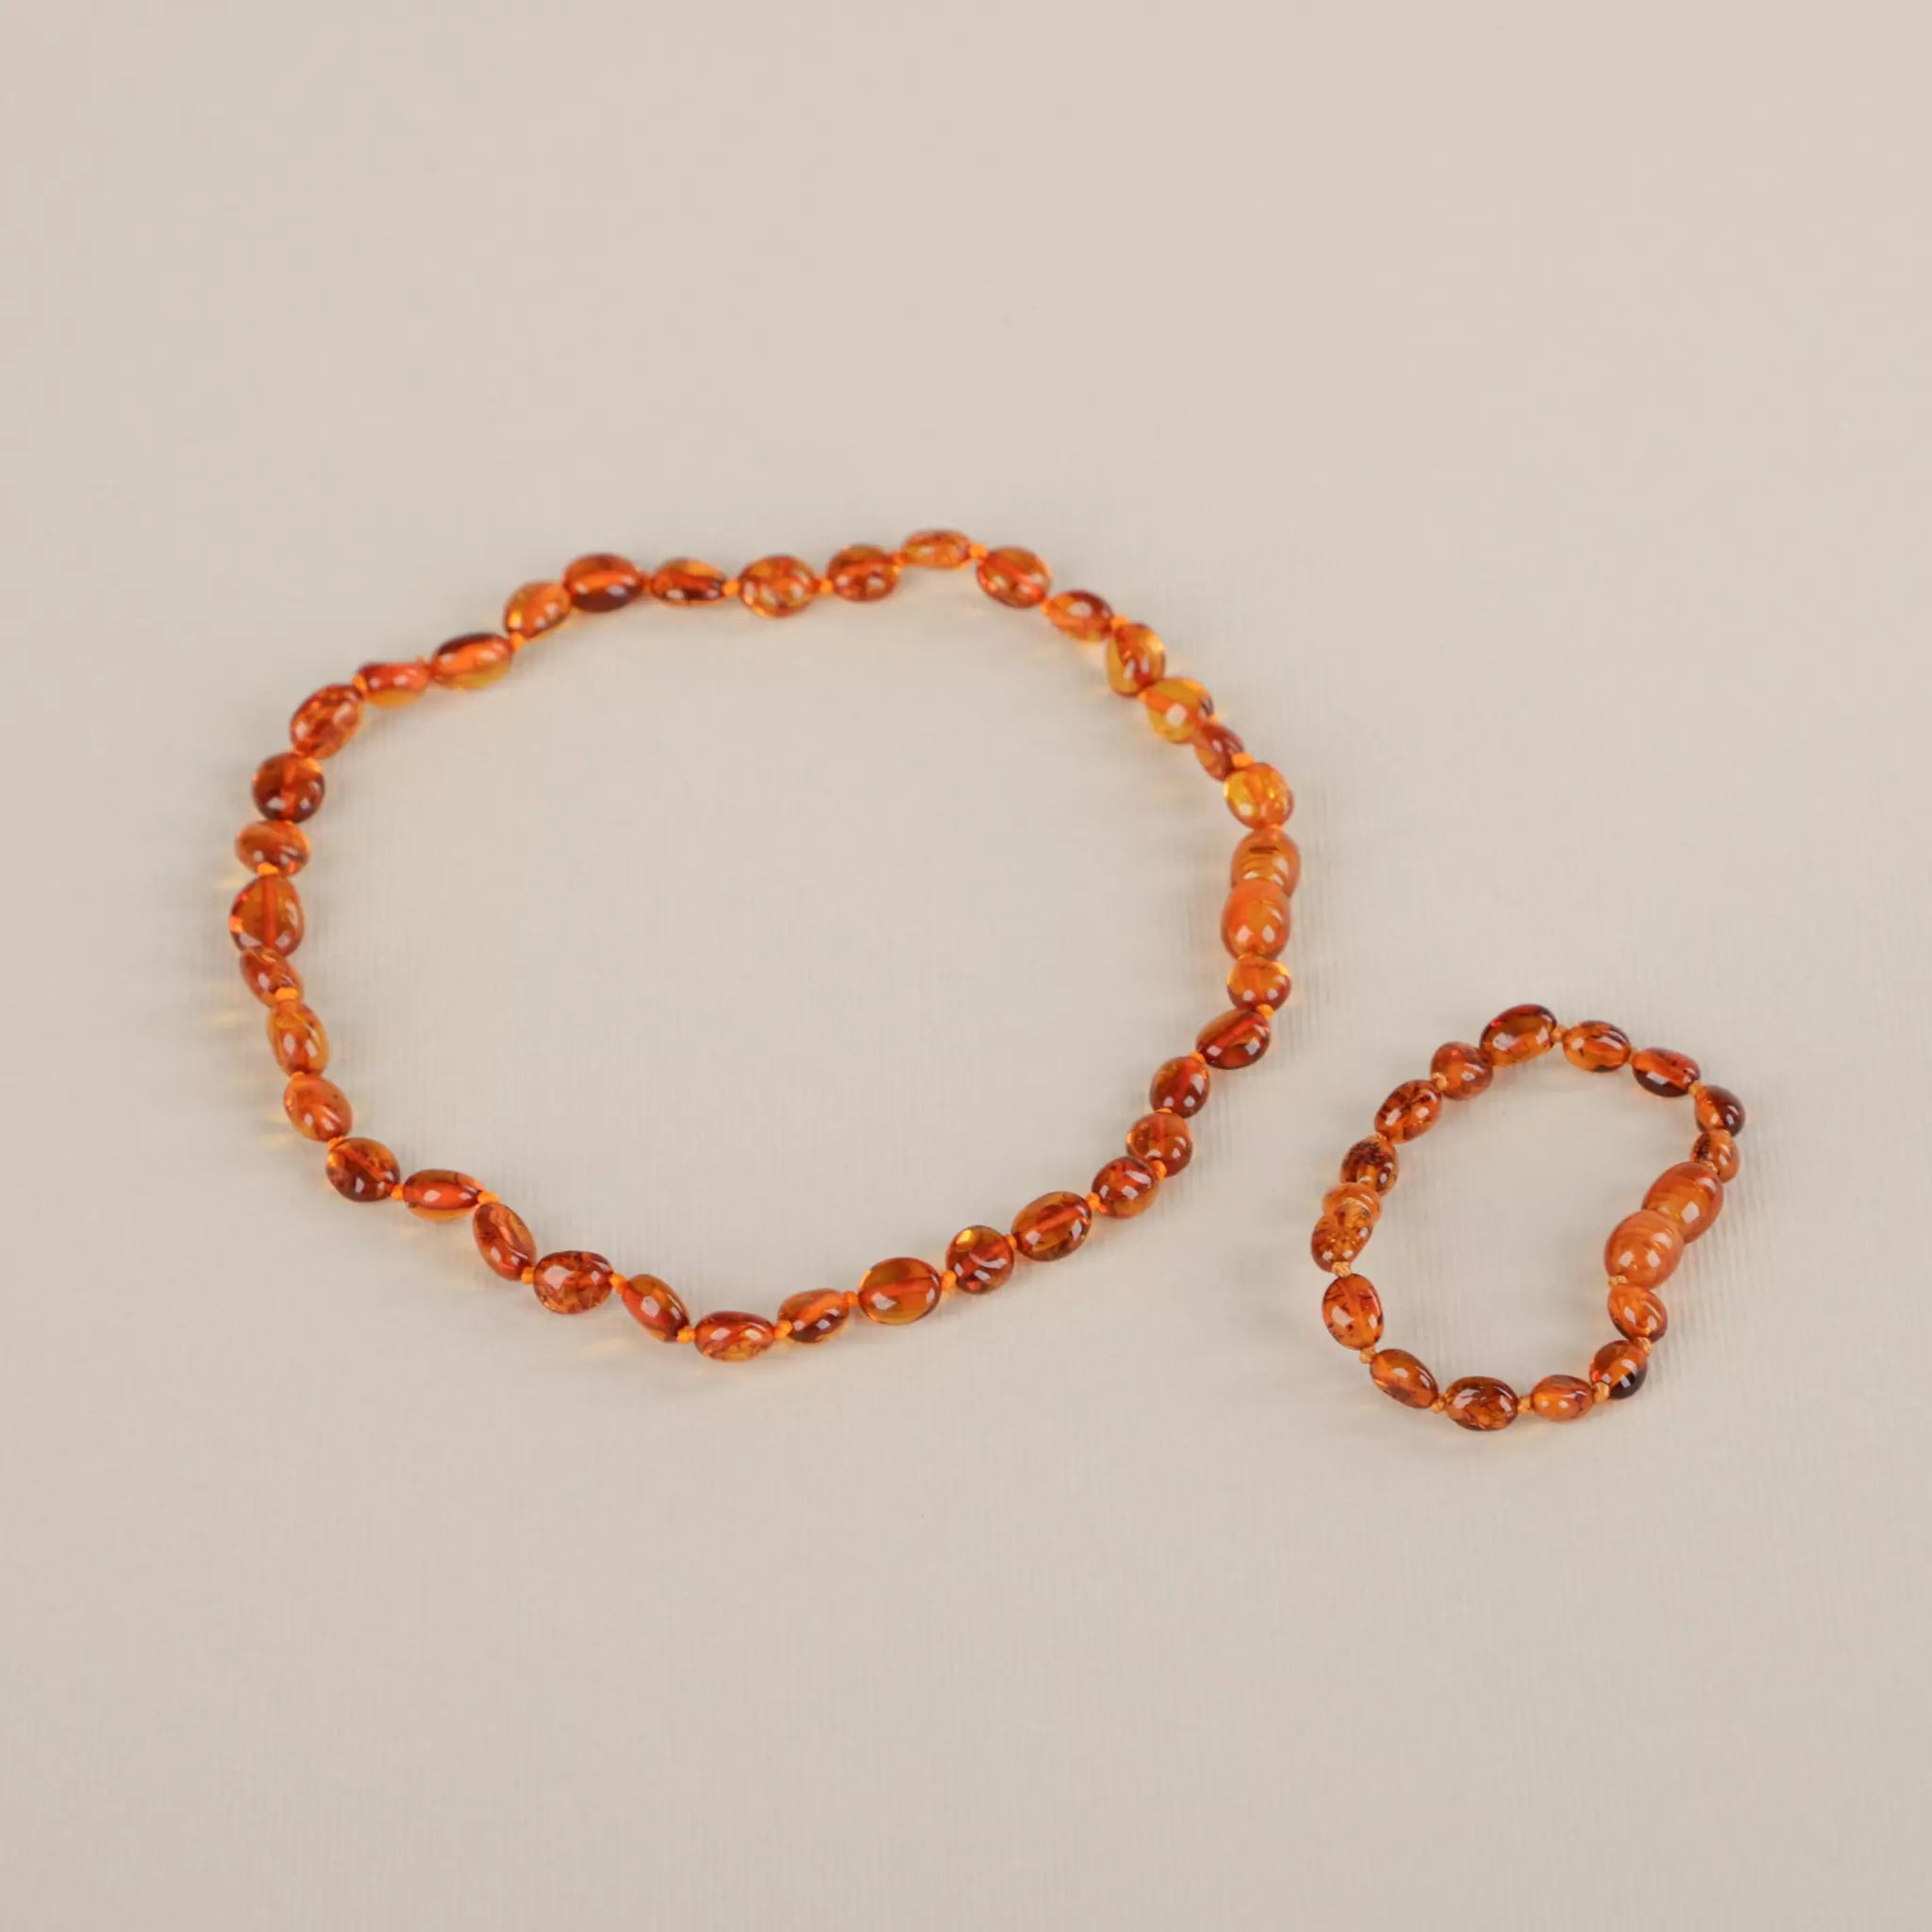 Amazon.com: Genuine Amber Unpolished Baroque Bracelet - Natural Amber  Jewelry - Baltic Sea Amber Beads Hand-Assembled in Europe - 7 Inch -  Cognac: Clothing, Shoes & Jewelry